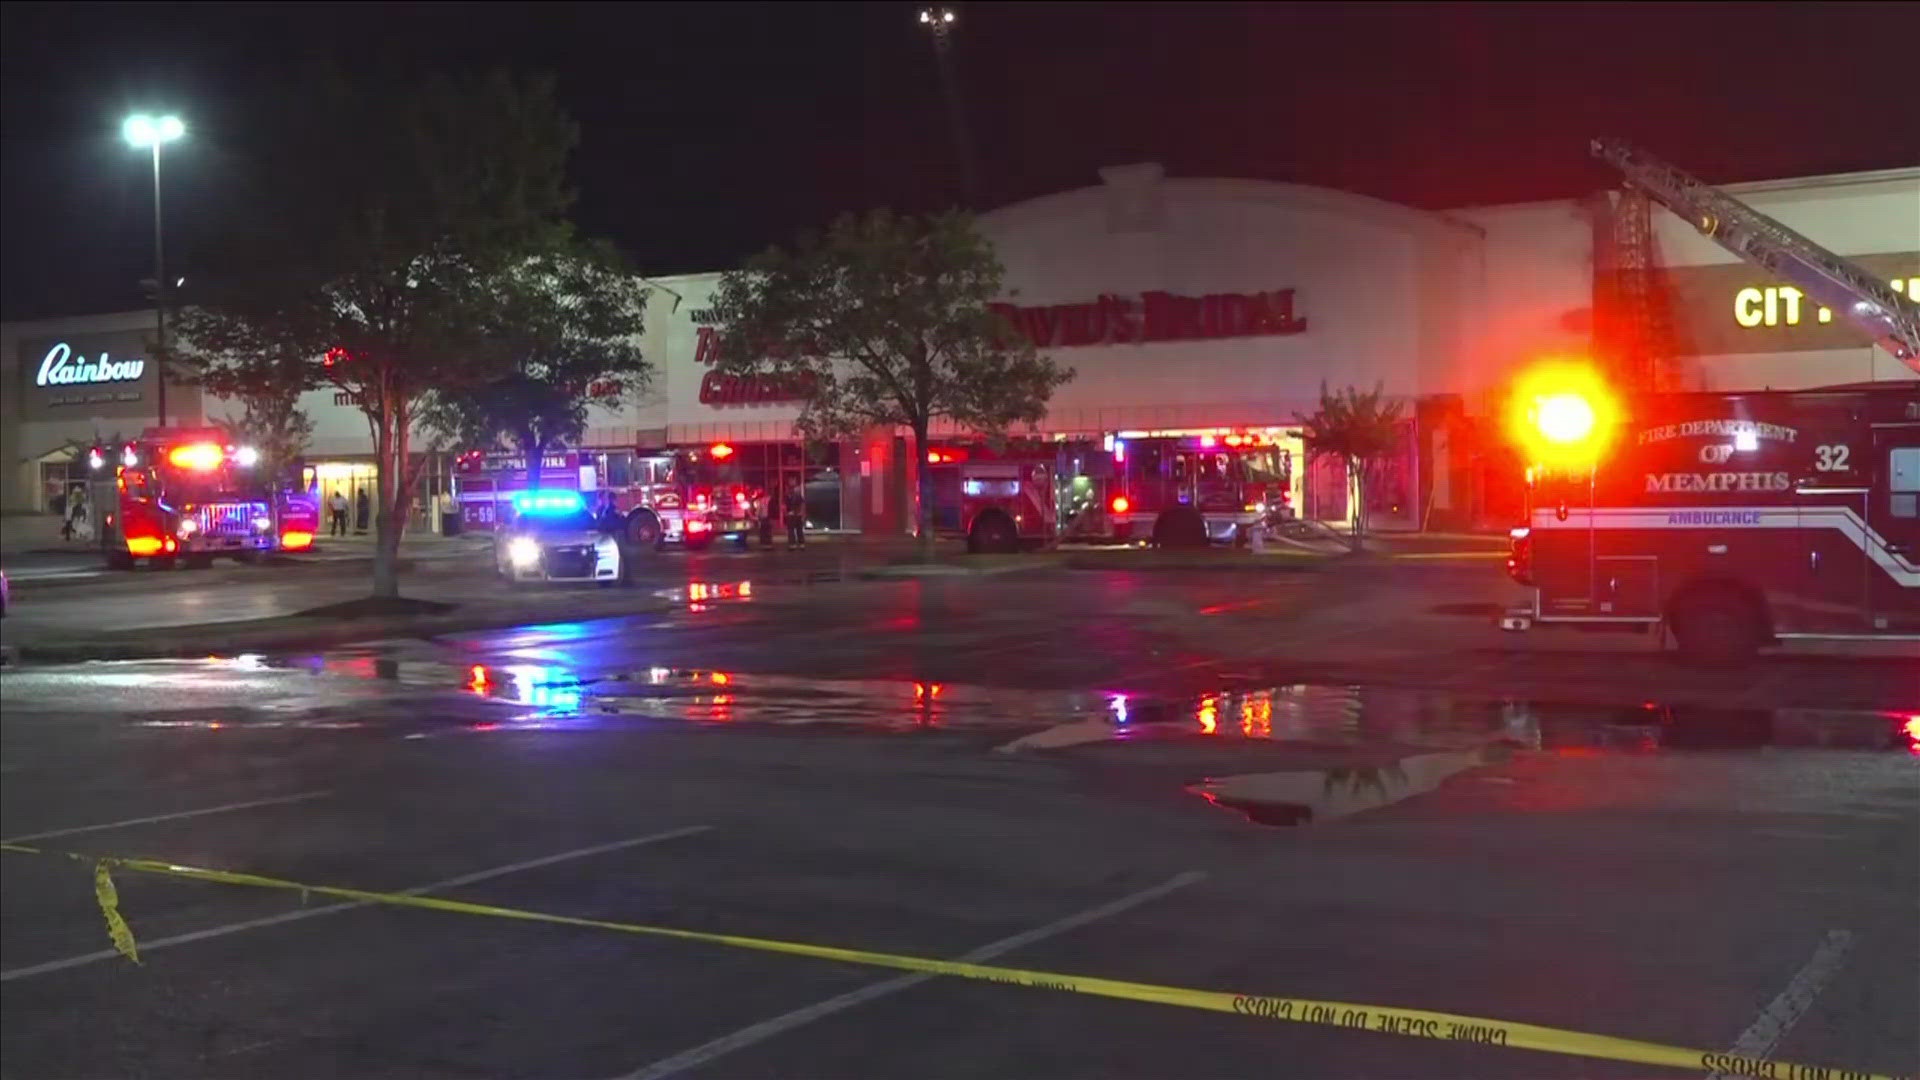 On Friday, May 24, at around 9:30 p.m., ABC24 crews confirmed firefighters were at David's Bridal in Cordova after smoke and flames were seen coming from the store.